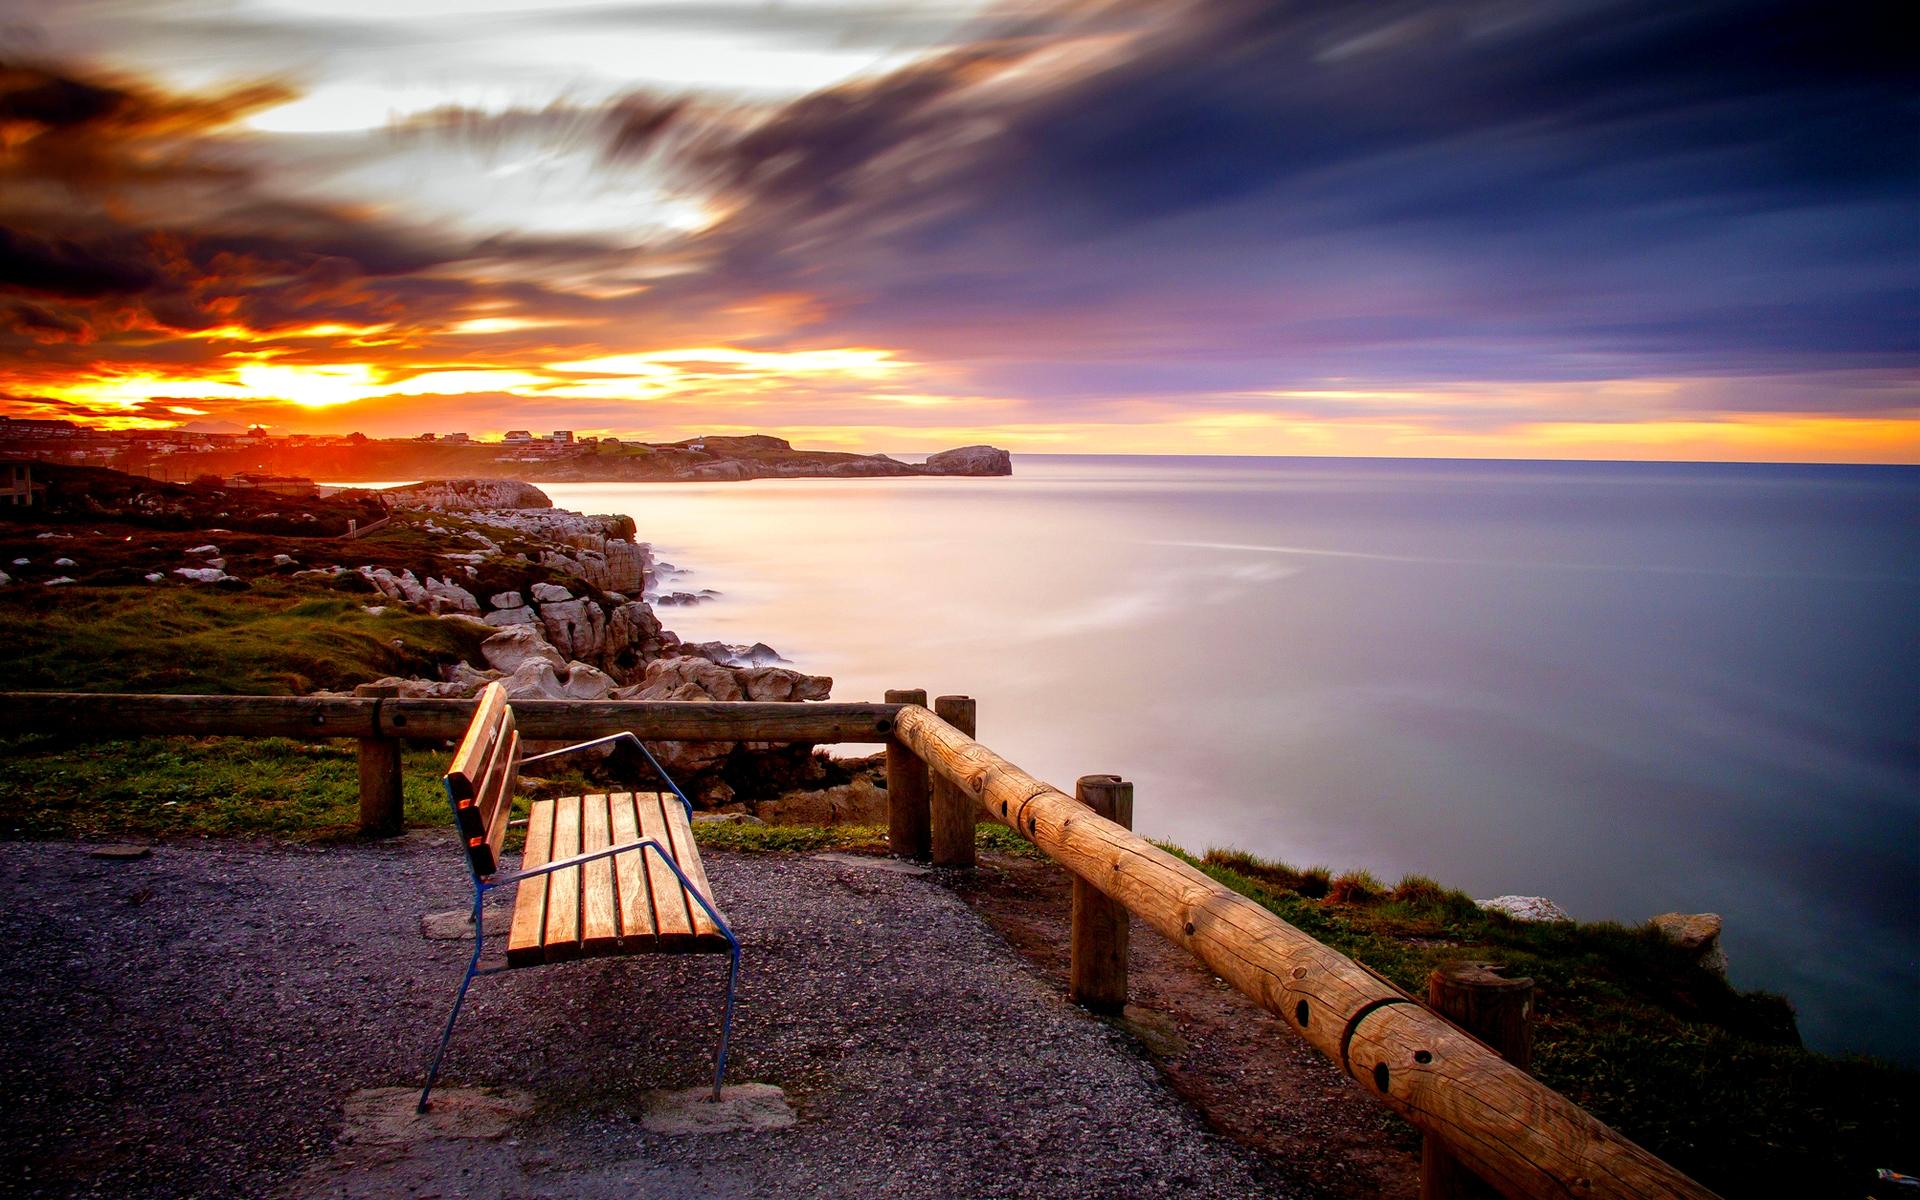 A bench overlooking the ocean at sunset. - Calming